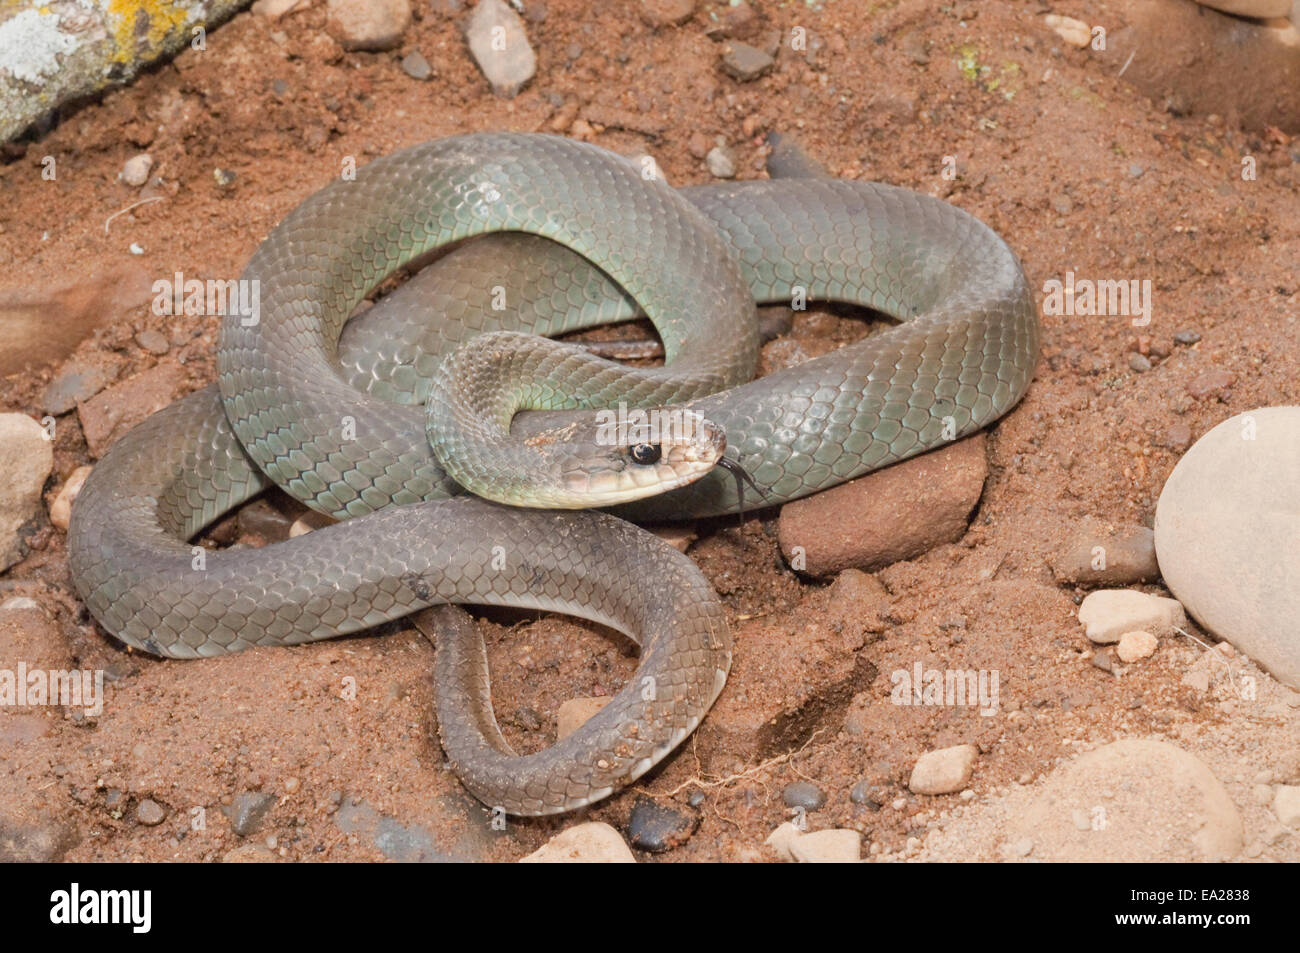 Blue racer, Coluber constrictor foxi, native to North America Stock Photo